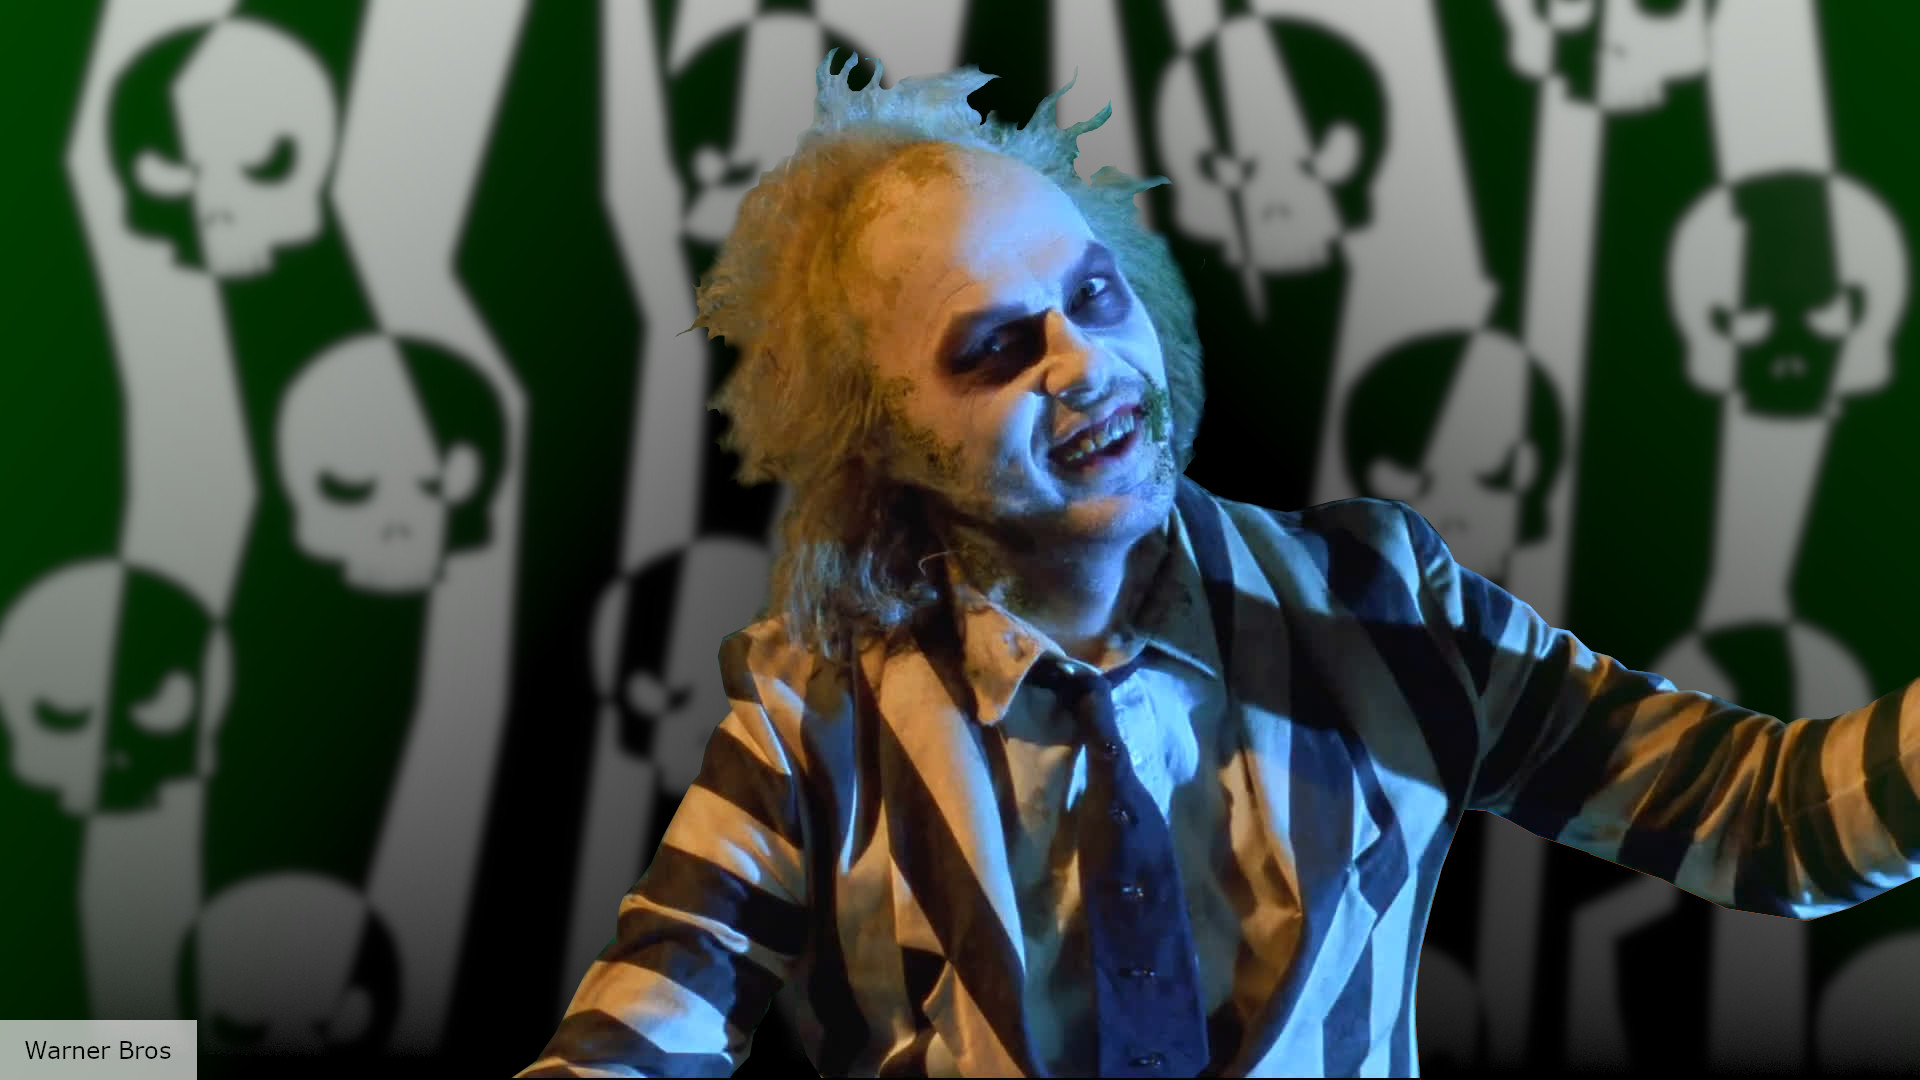 Beetlejuice 2 release date, cast, plot, and more news